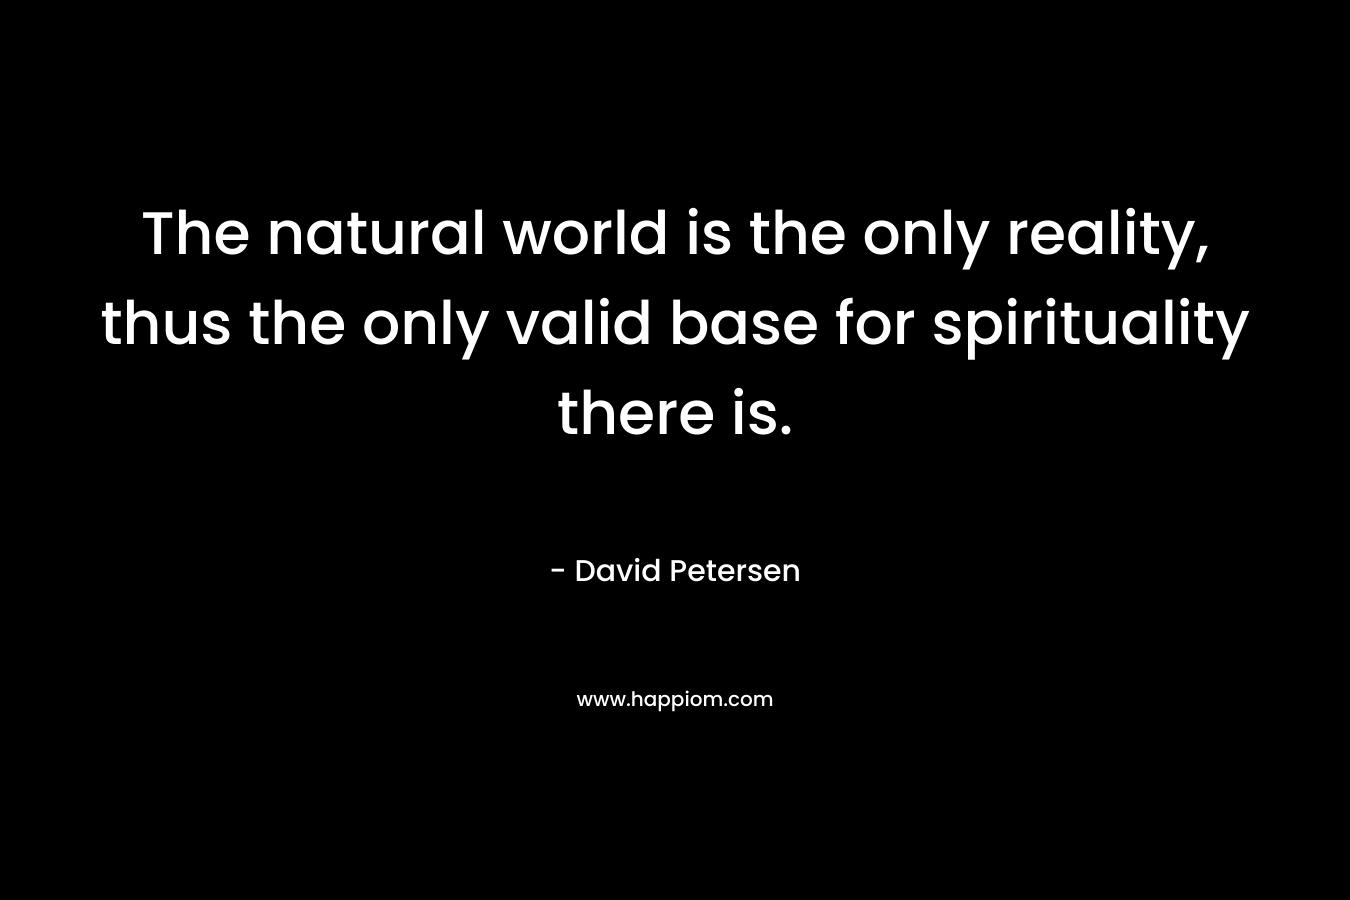 The natural world is the only reality, thus the only valid base for spirituality there is. – David Petersen